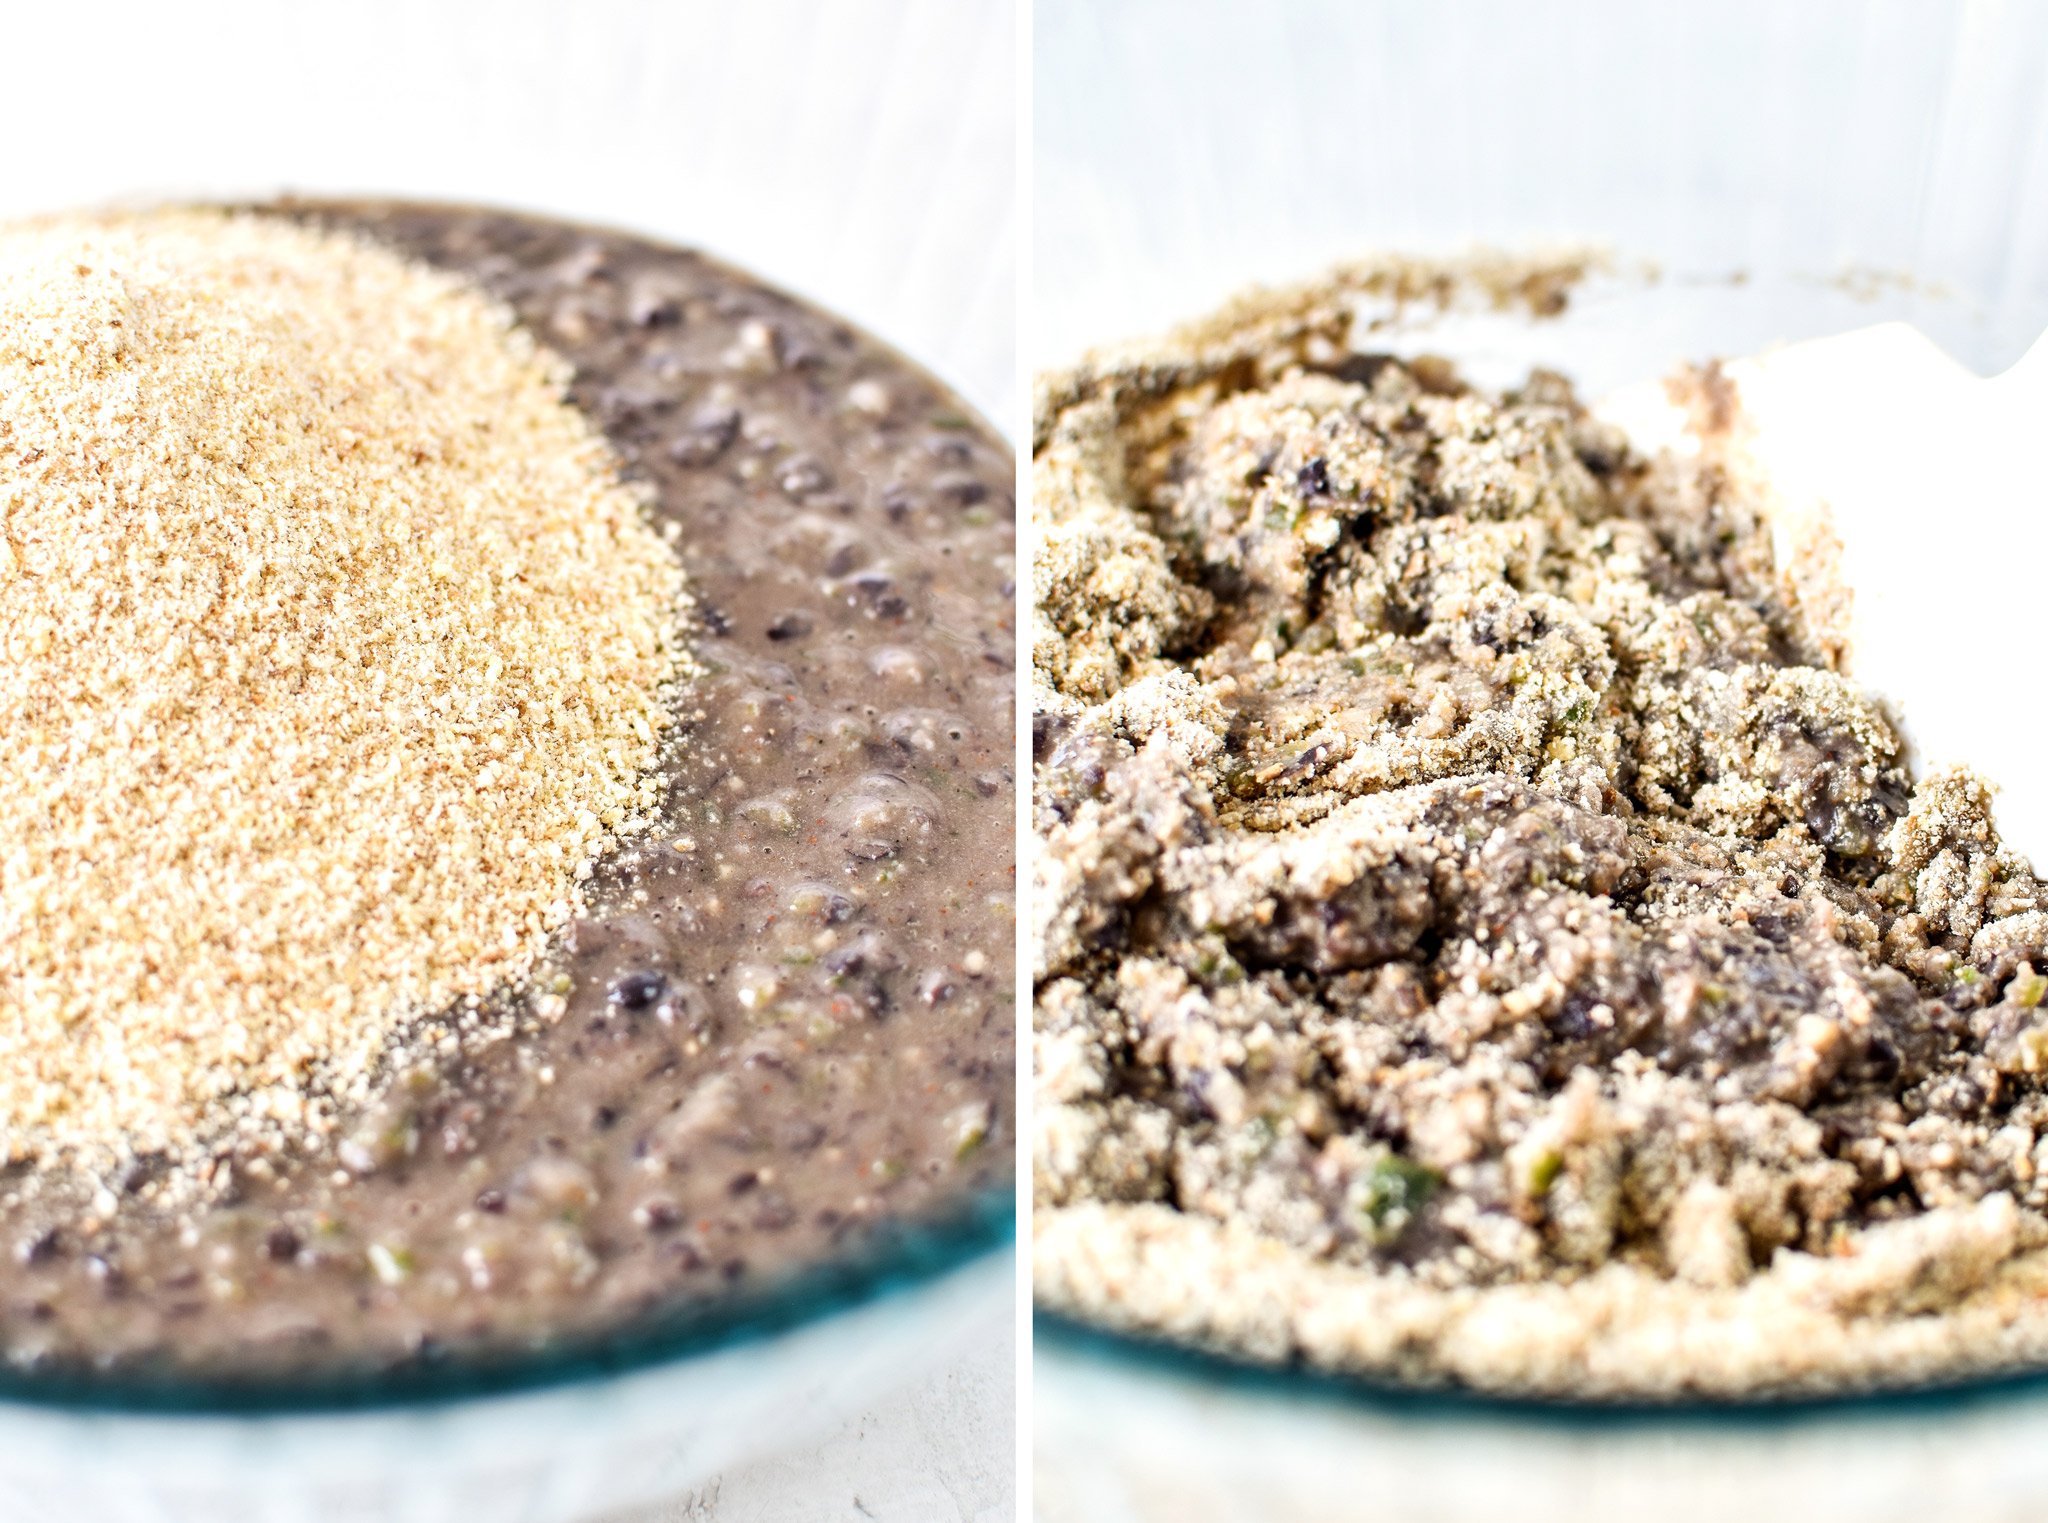 Left: Black bean burger mixture with breadcrumbs added. Right: Black bean burger mixture with the breadcrumbs being stirred in.